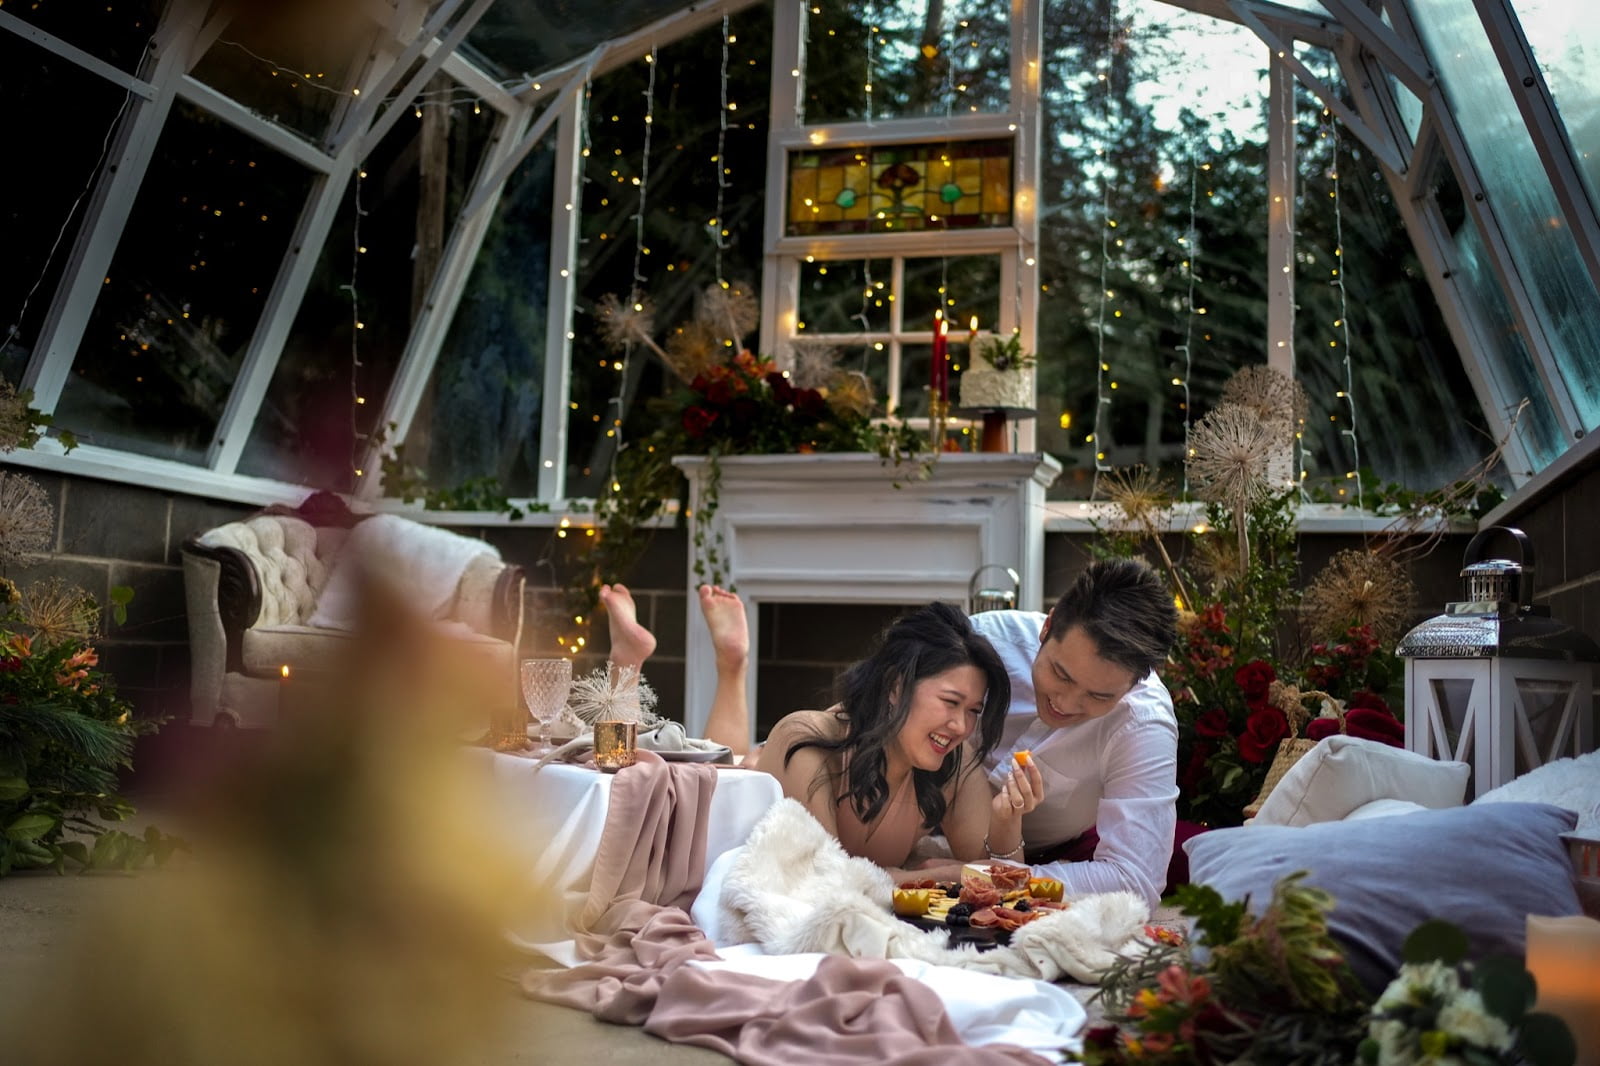 Romantic picnic wedding proposal in decorated greenhouse